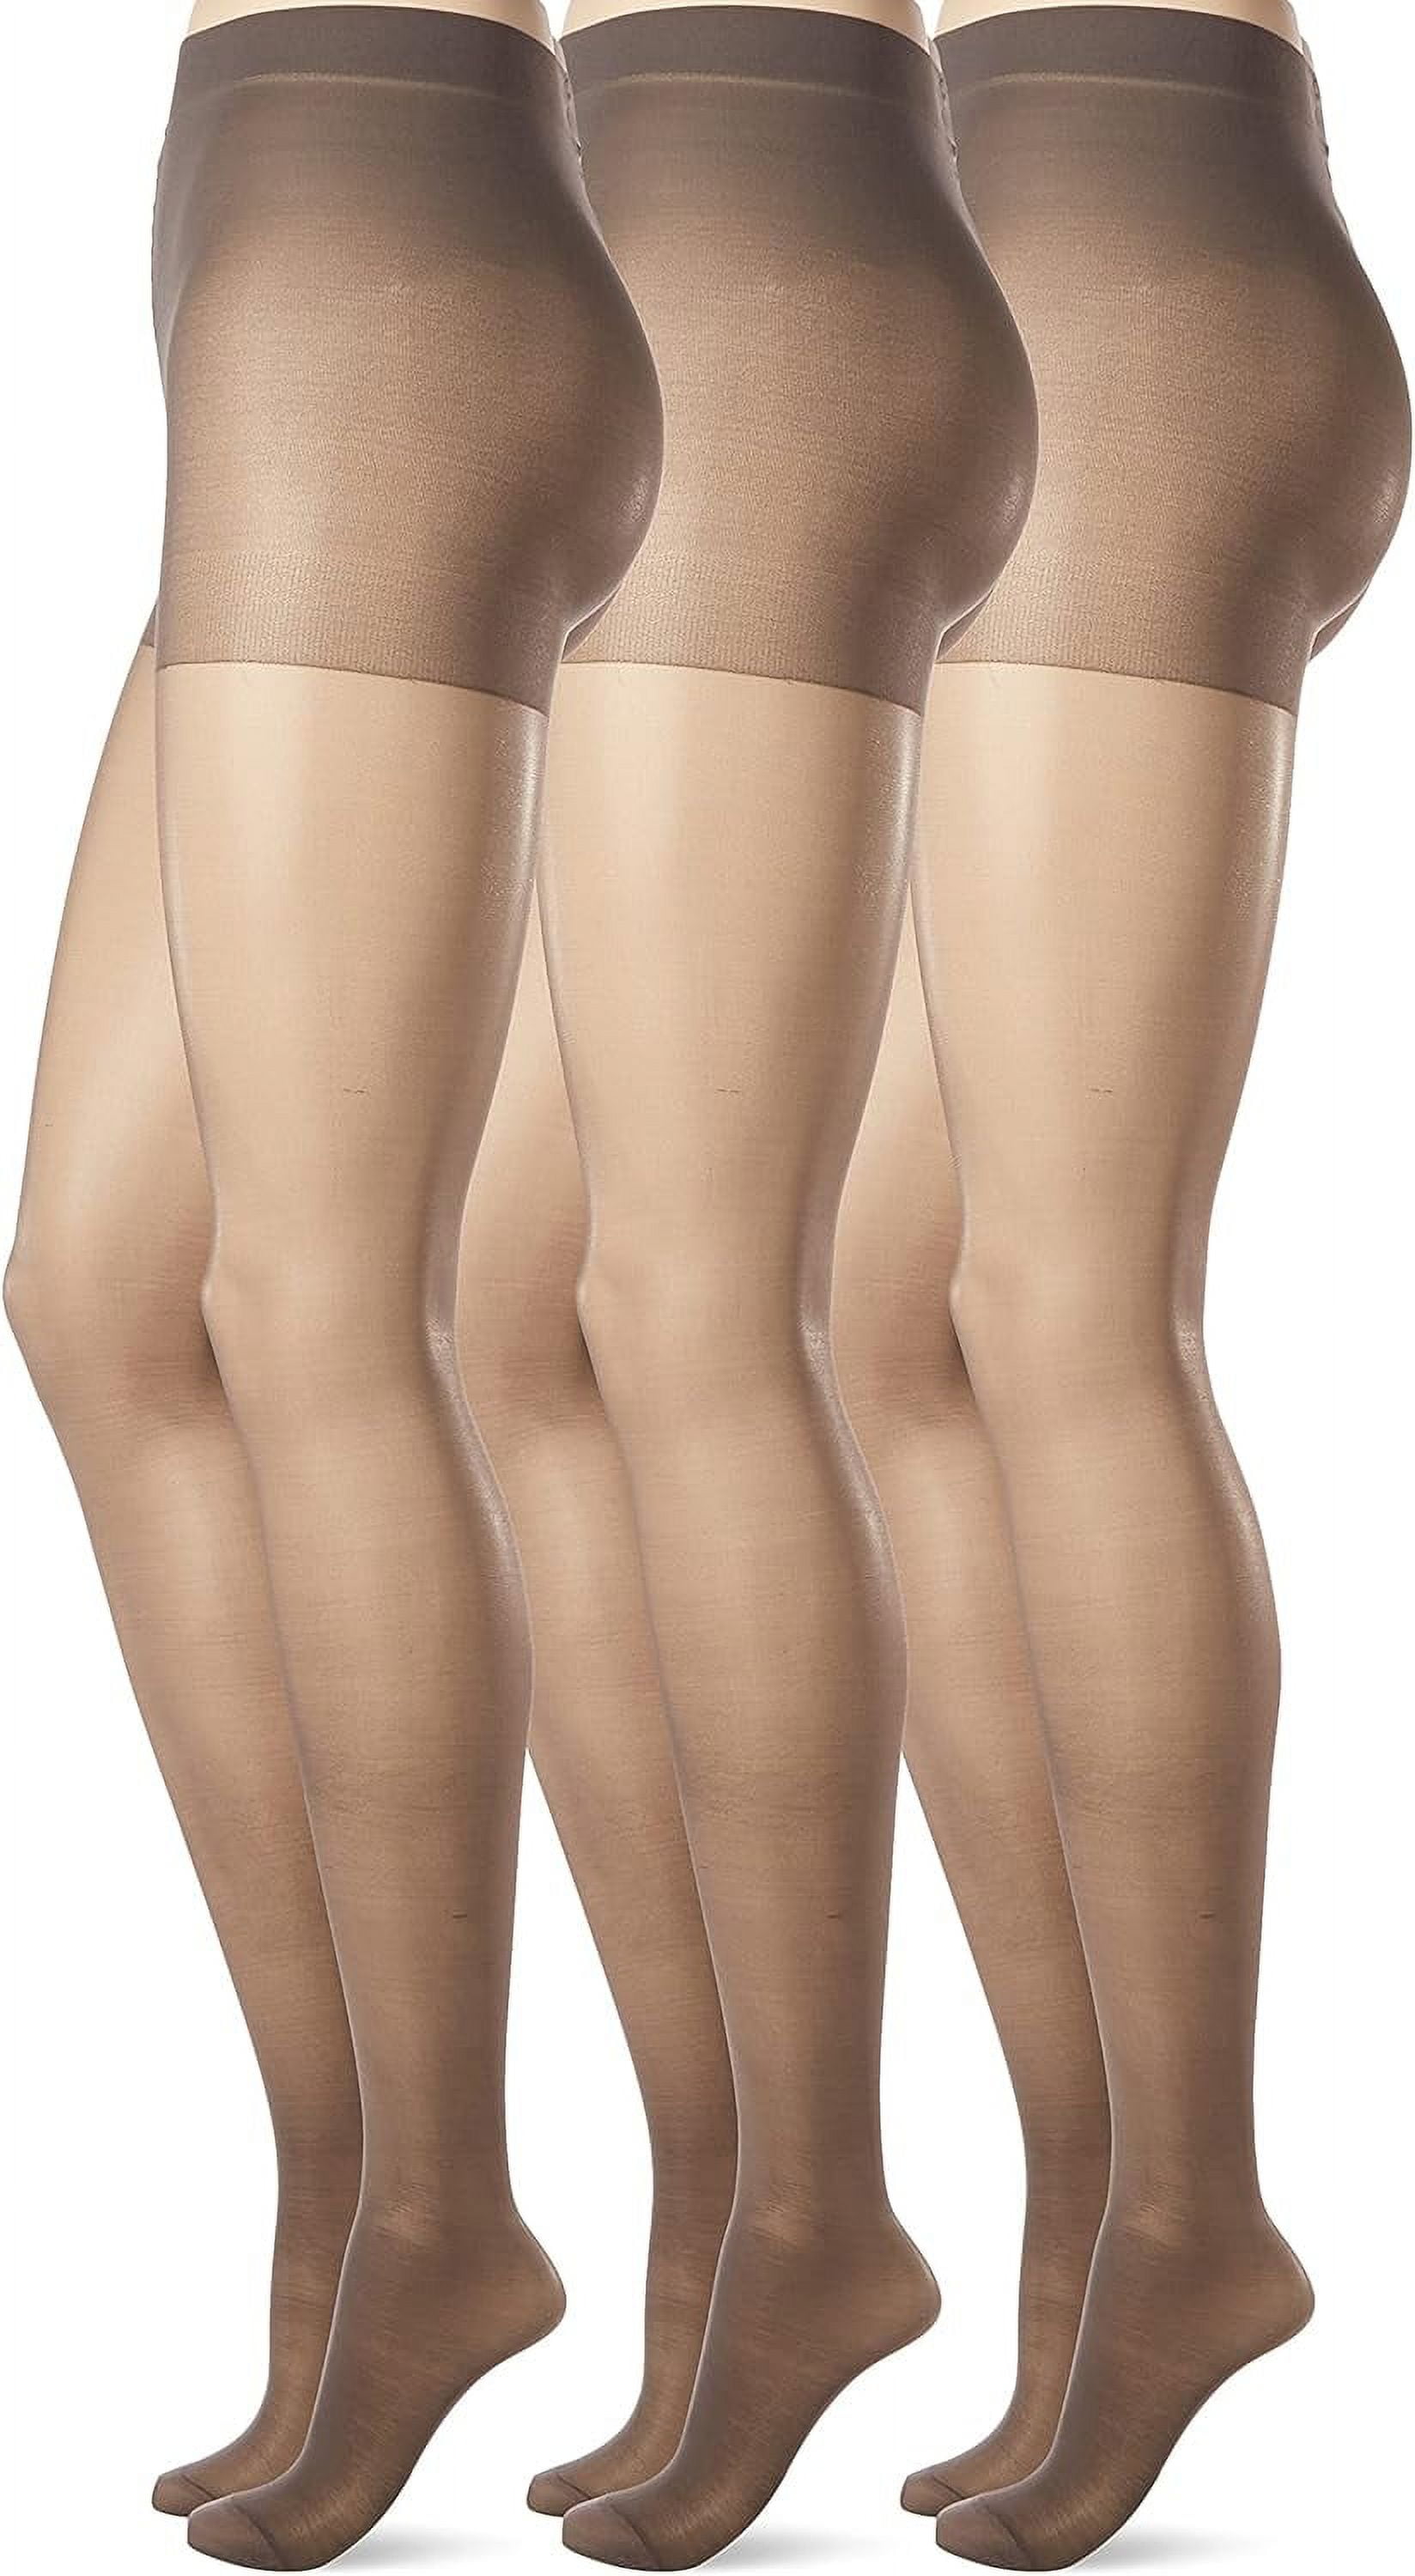 L'eggs Women's Sheer Energy Medium Support Control Top Pantyhose, 3 Pack 